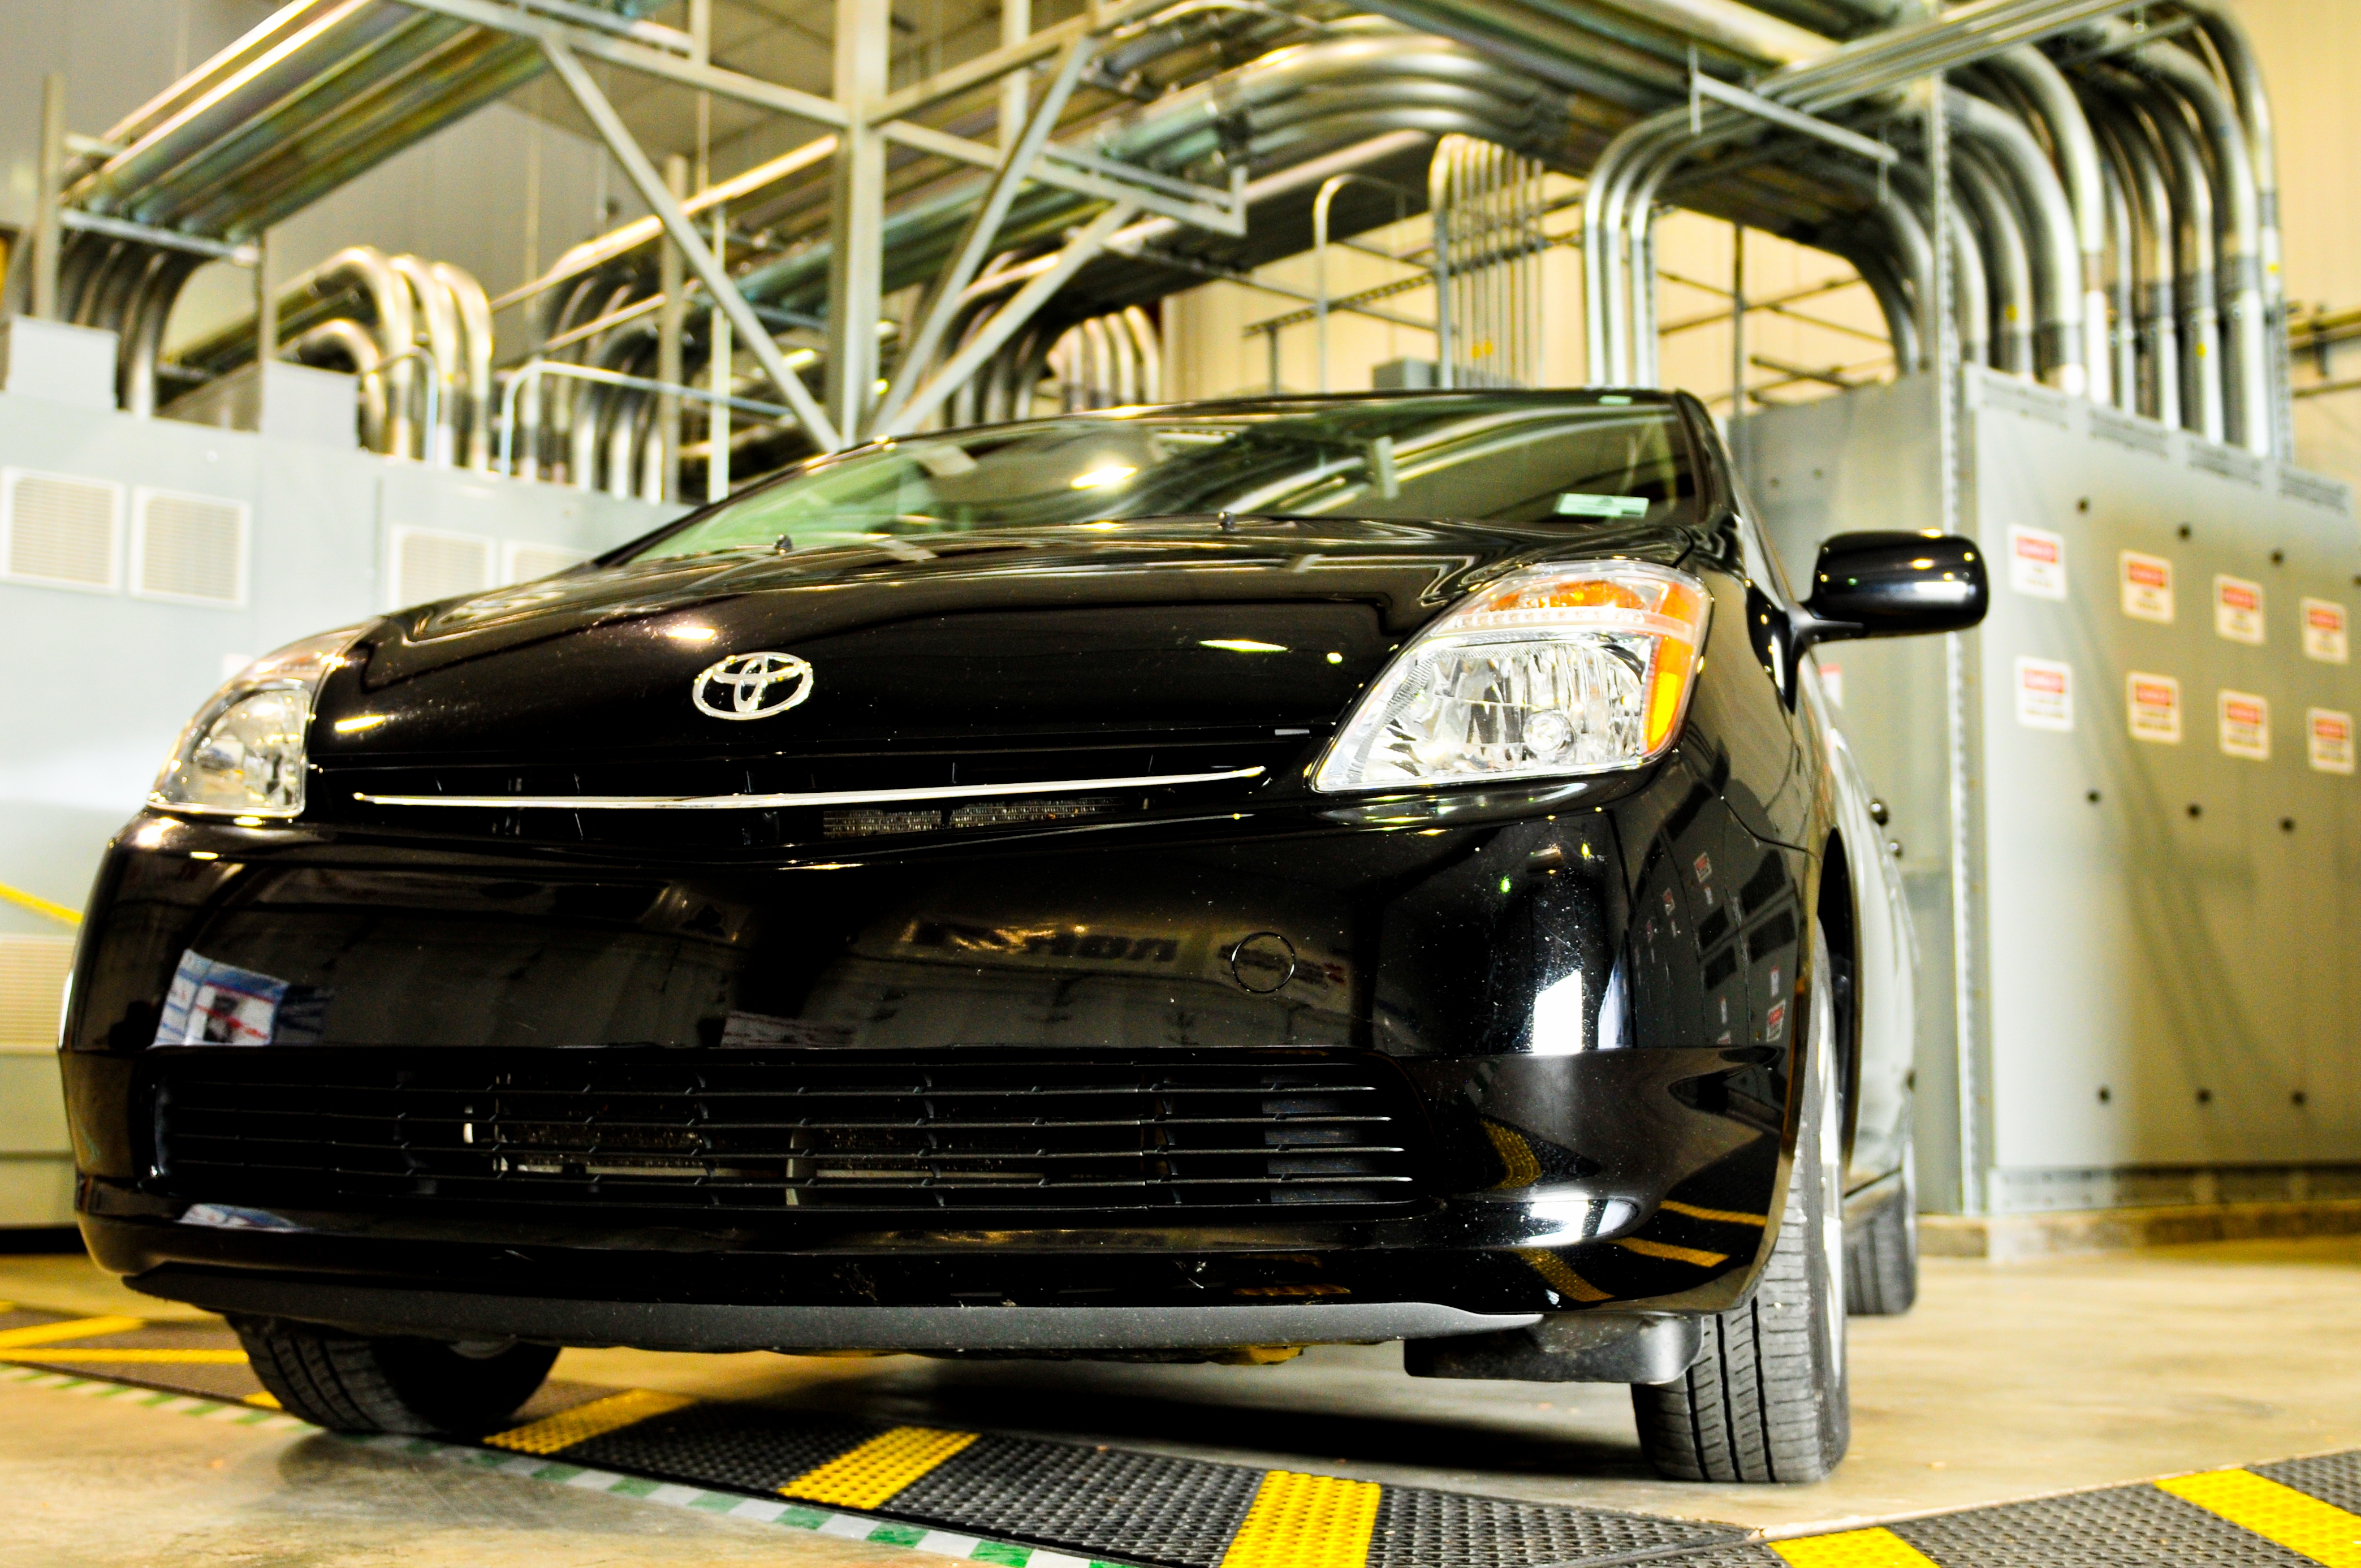 Arkansas Power Electronics International and the University of Arkansas are part of a research collaboration with Toyota to develop new technologies that will make vehicles more fuel efficient.